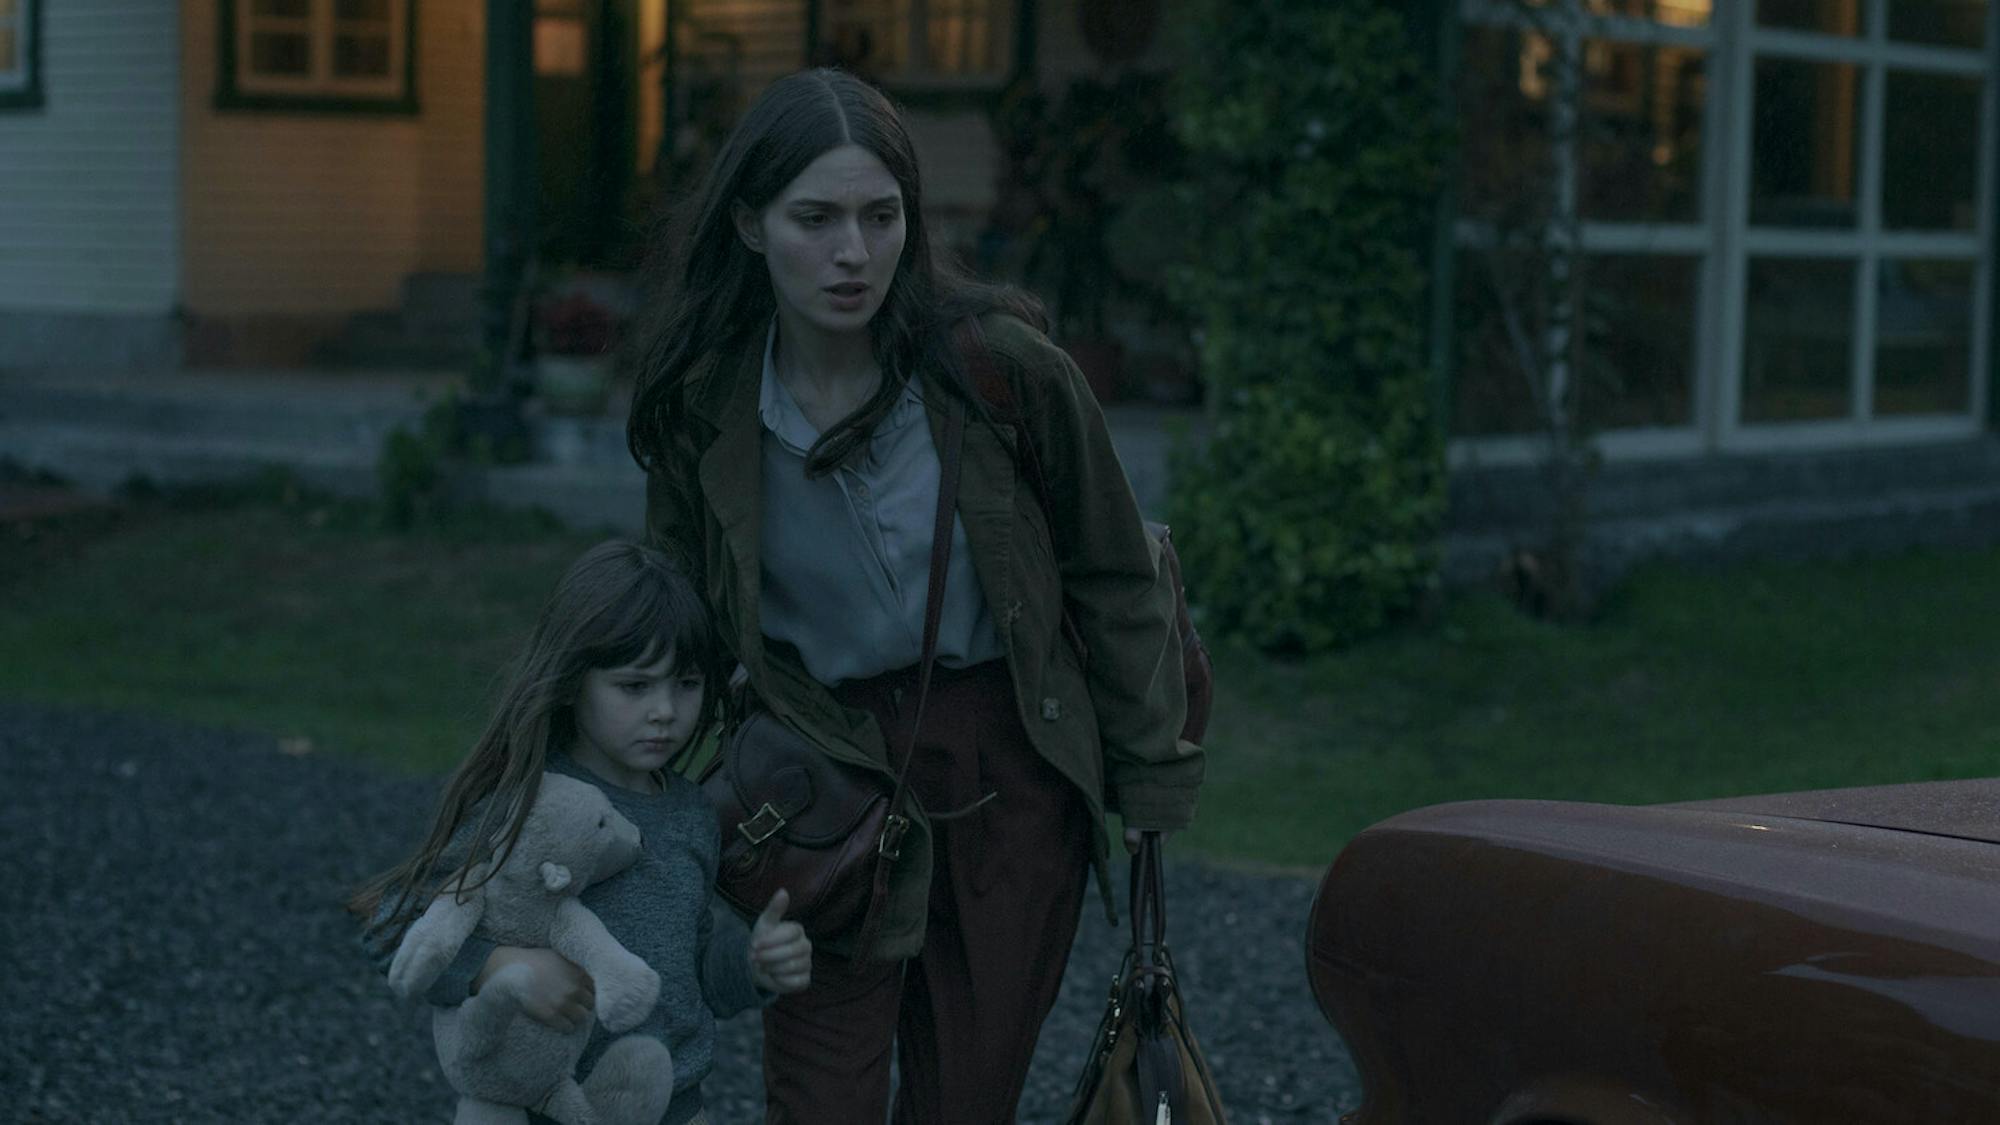 Nina (Guillermina Sorribes Liotta) and Amanda (María Valverde) rush to a red car at dusk. Nina clutches a bear while her mom carries two brown leather bags.